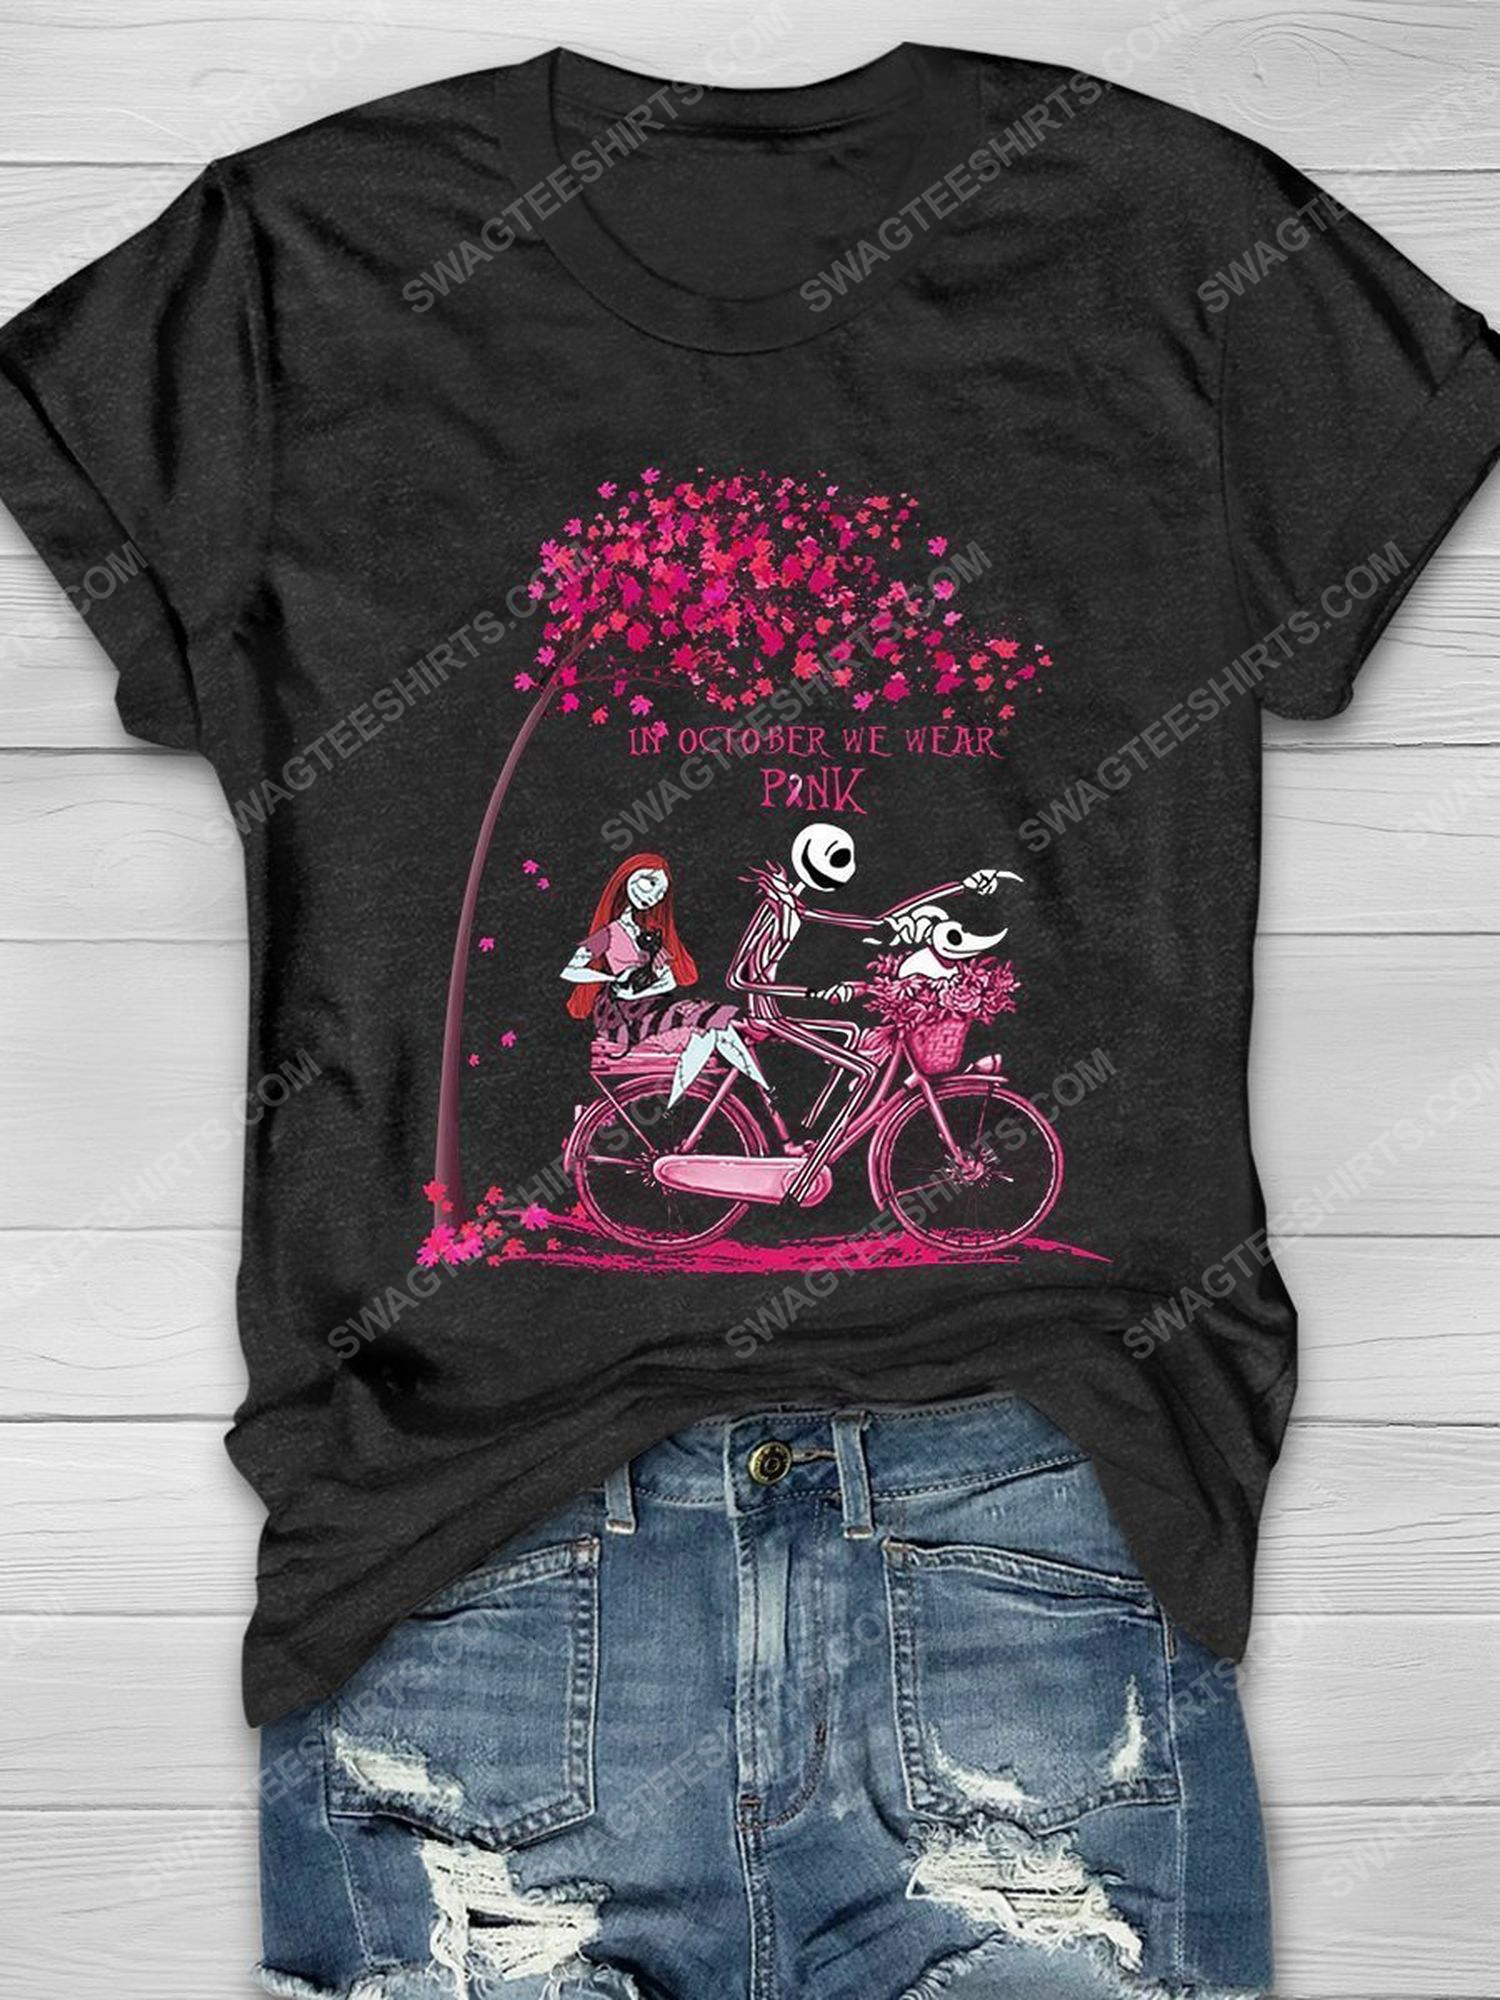 Breast cancer in october we wear pink jack and sally shirt